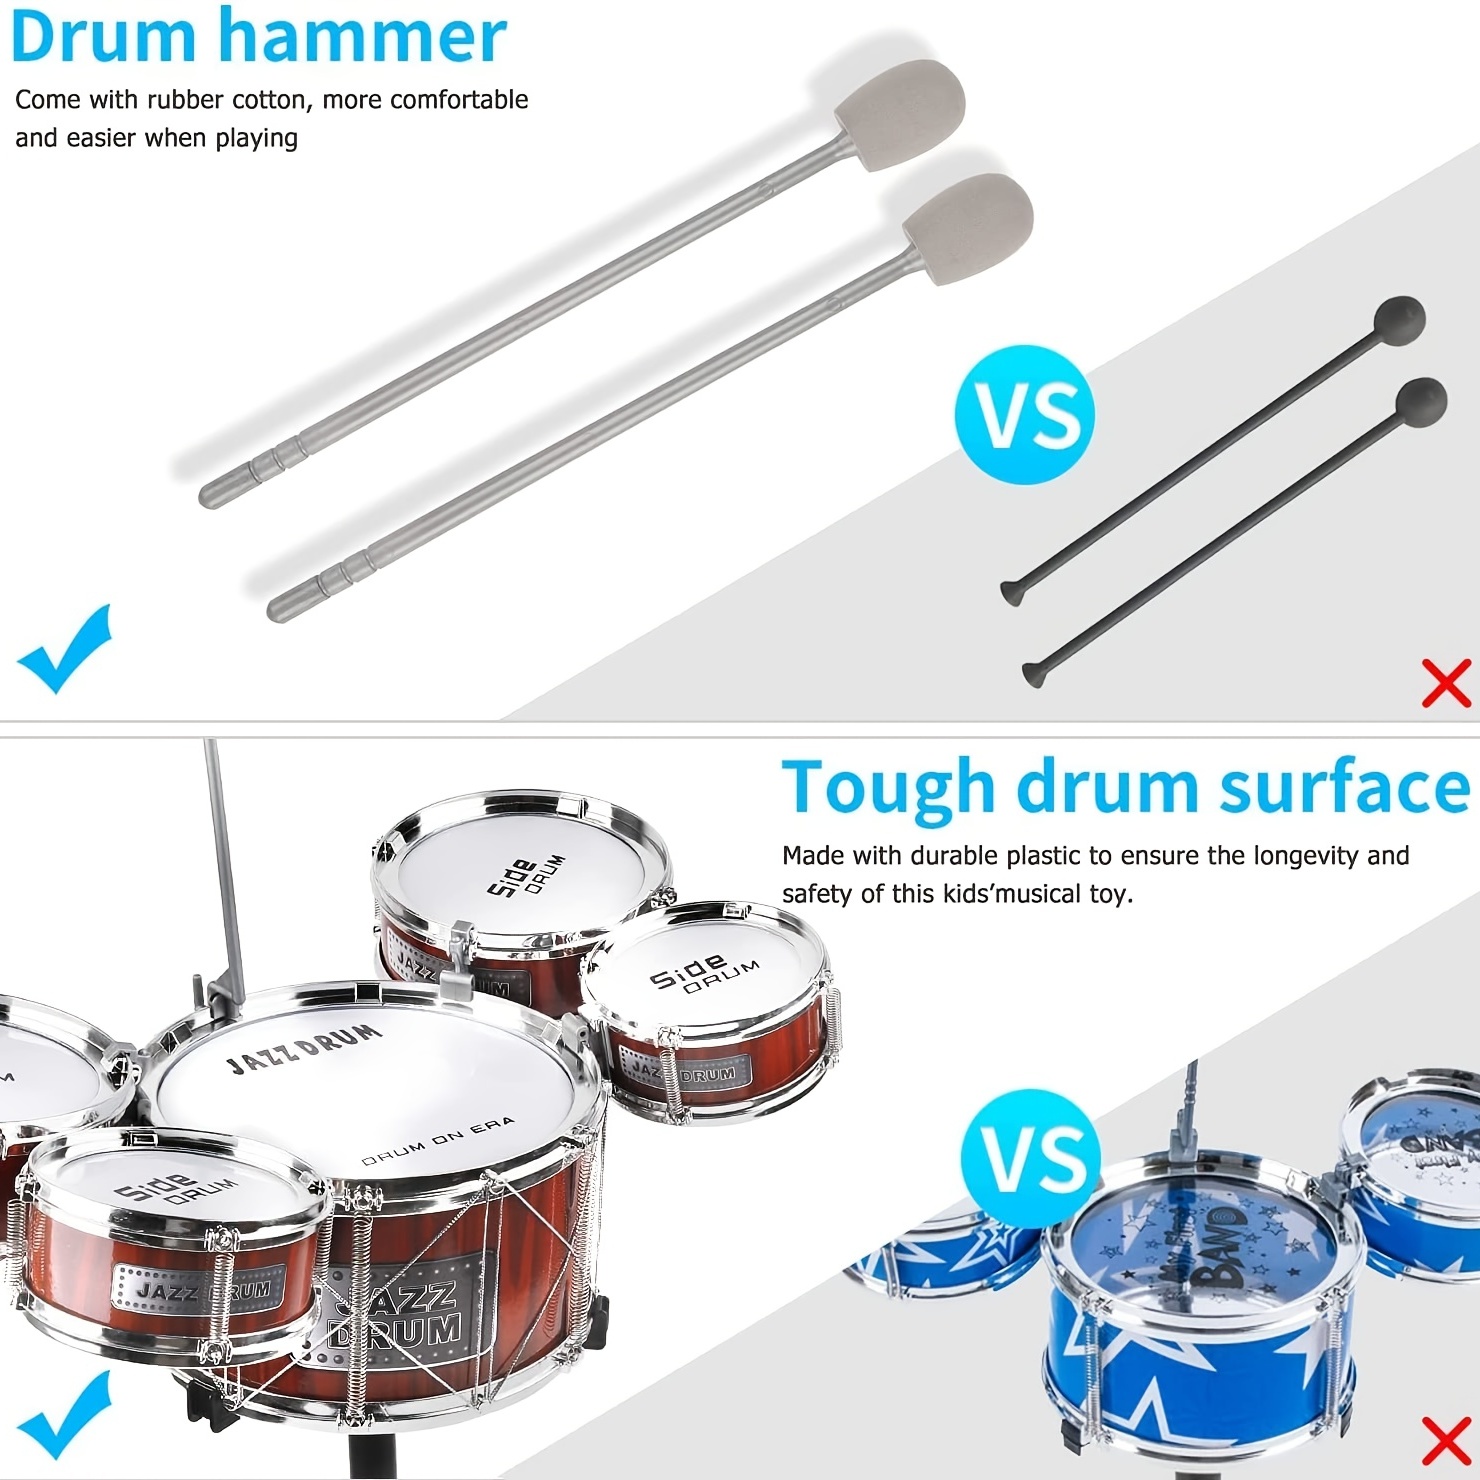 Drum Set for Kids Musical Instruments Kids Drum Set with Stool, Cymbal,  Drum Sticks, 4 Snare Drums and 1 Bass Drum Jazz Drum Kit Toys for 3 4 5 6  Year